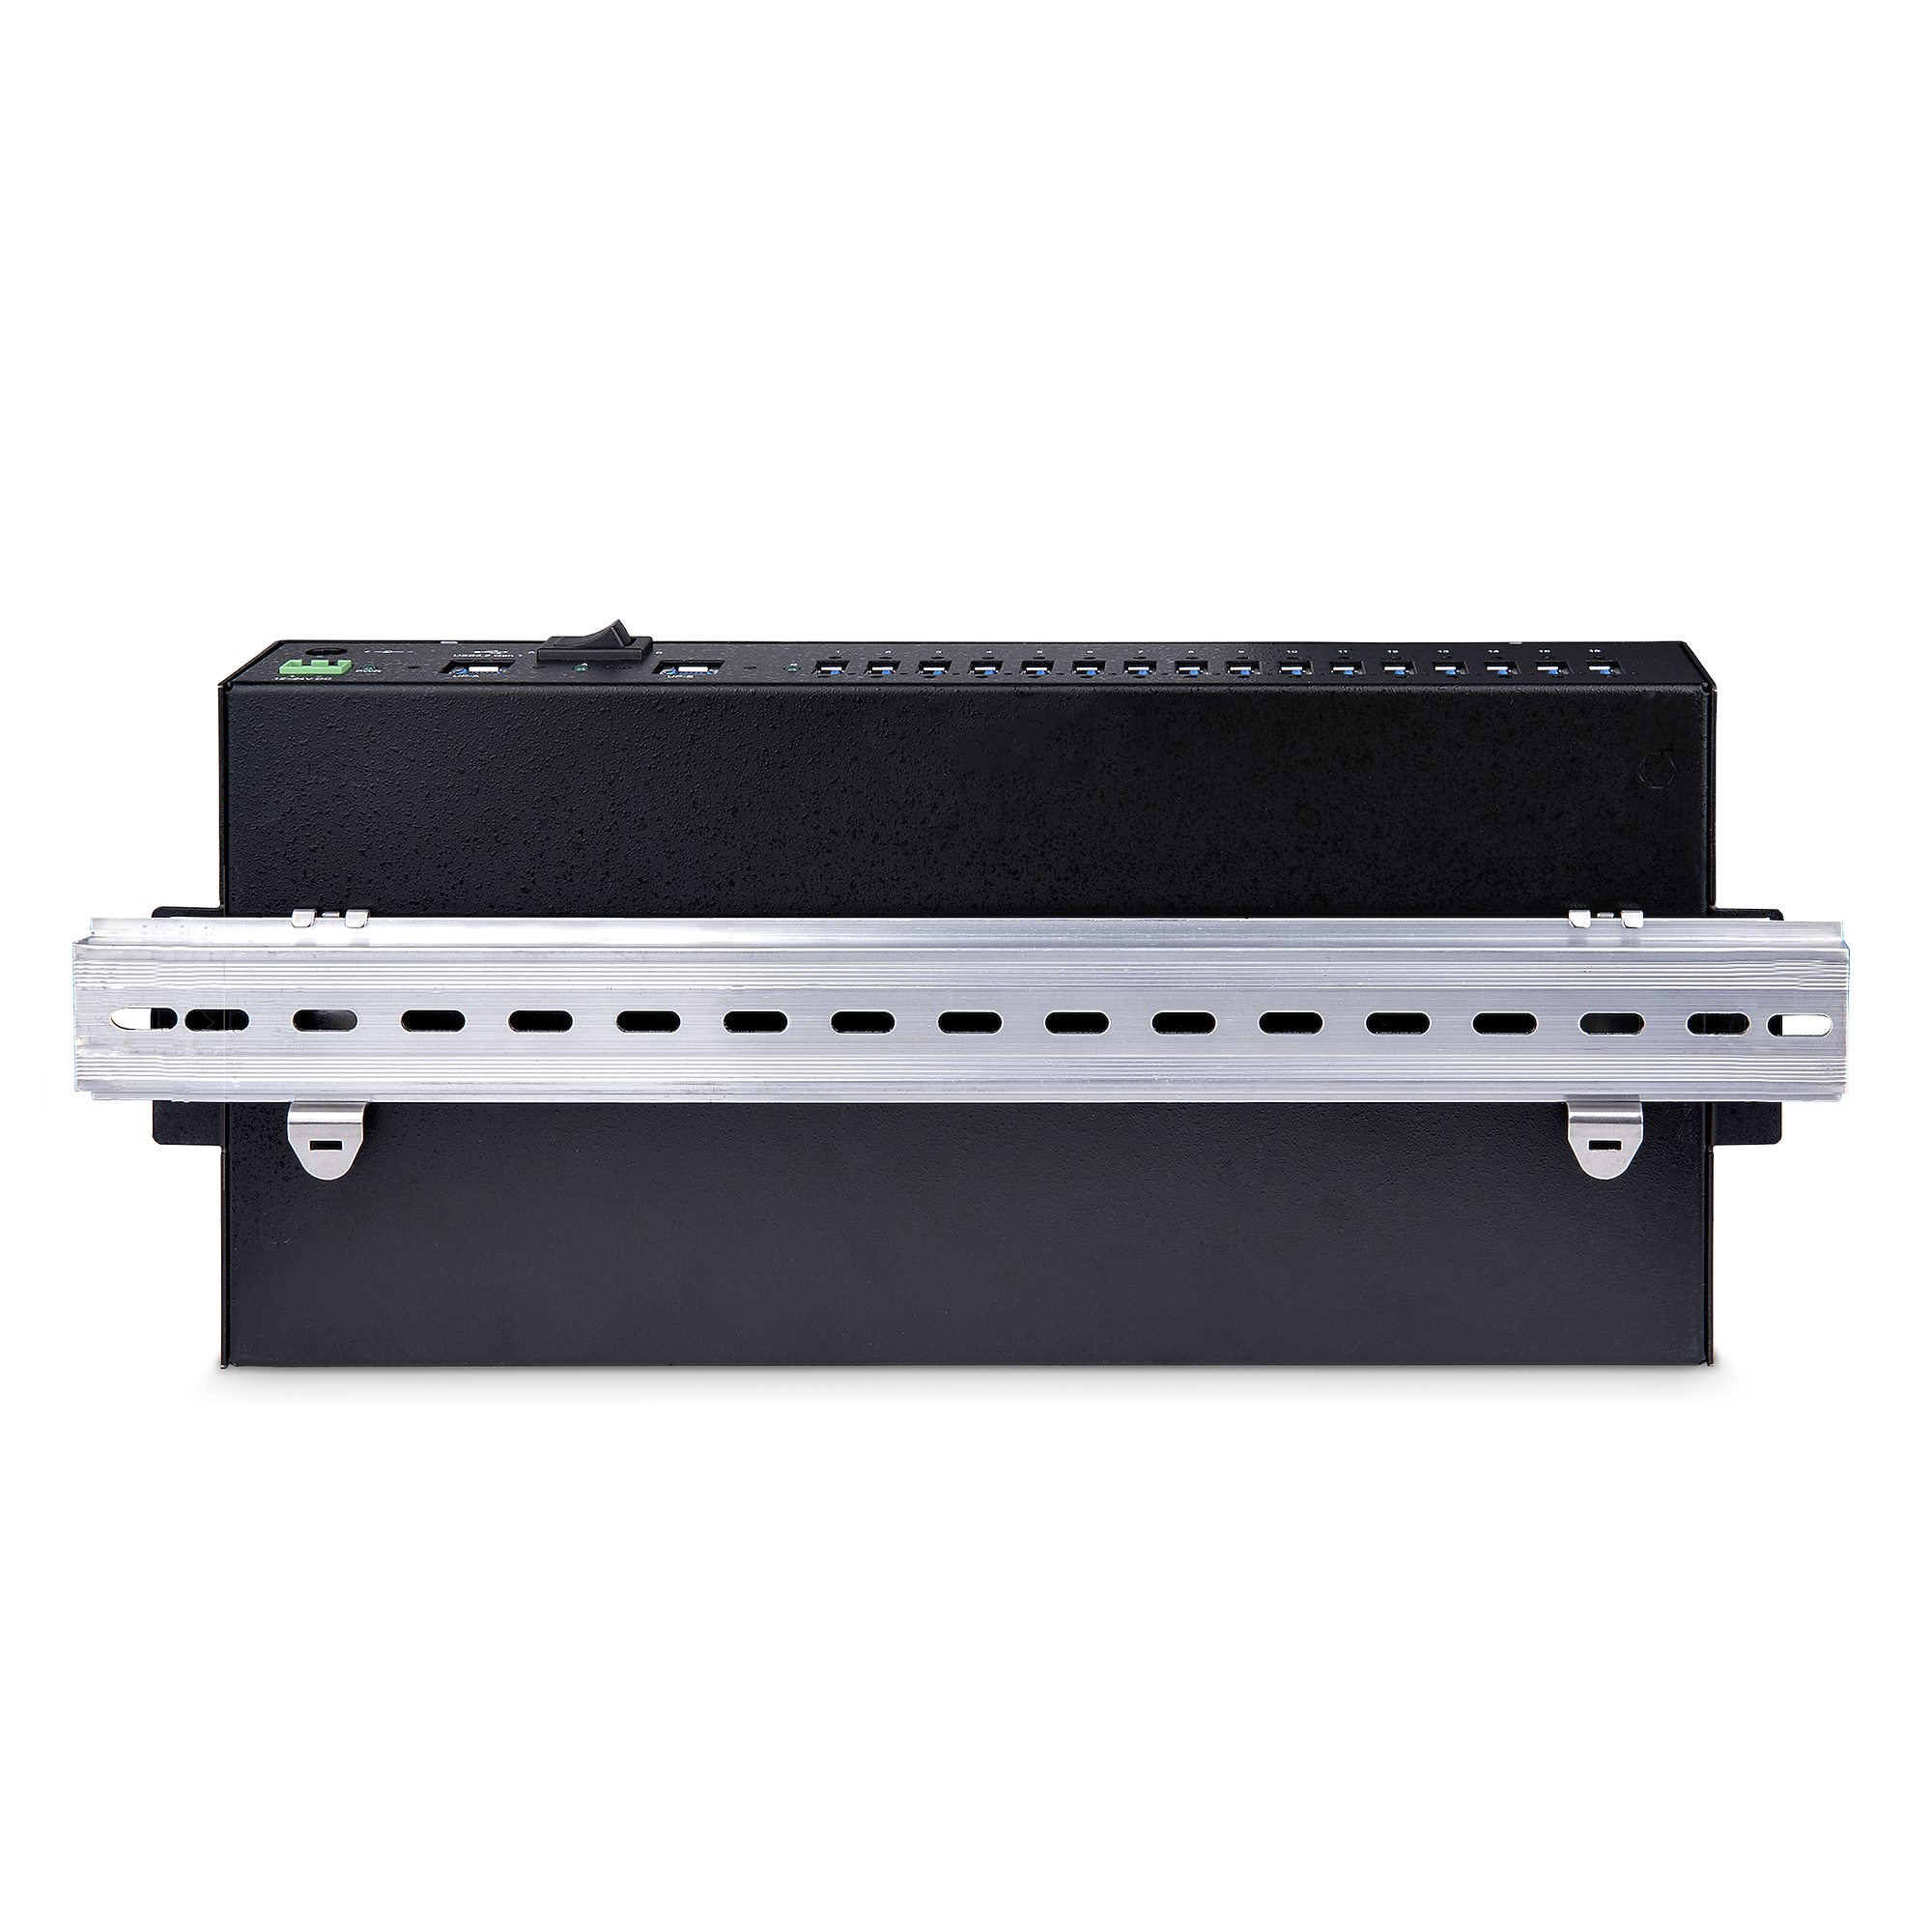 StarTech.com 16-Port Industrial USB 3.0 Hub 5Gbps, Metal, DIN/Surface/Rack Mountable, ESD Protection, Terminal Block Power, up to 120W Shared USB Charging, Dual-Host Hub/Switch